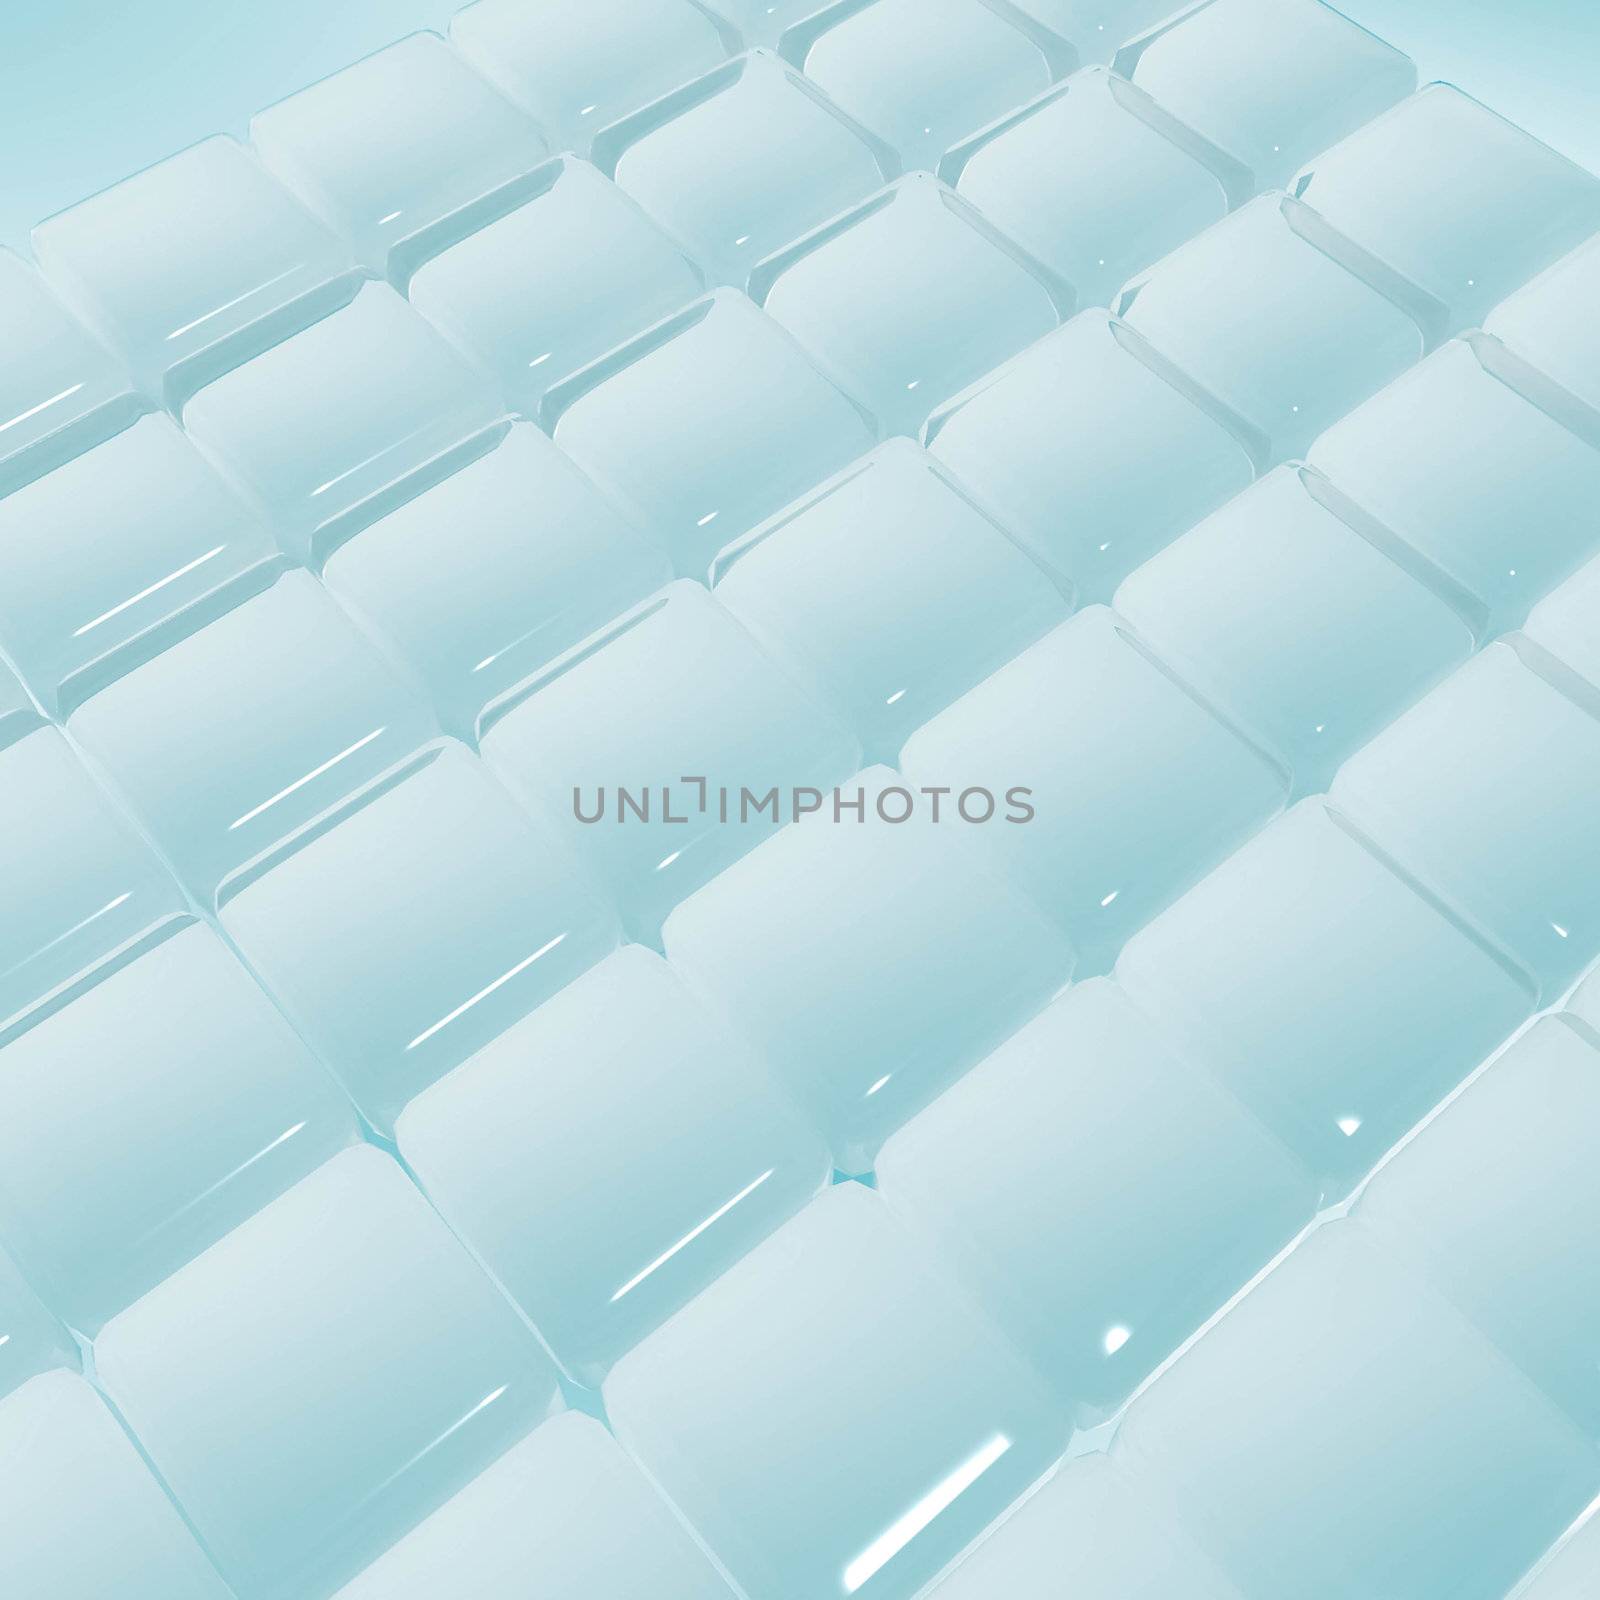 Smooth ice block pattern background at an angle with pink light reflection.